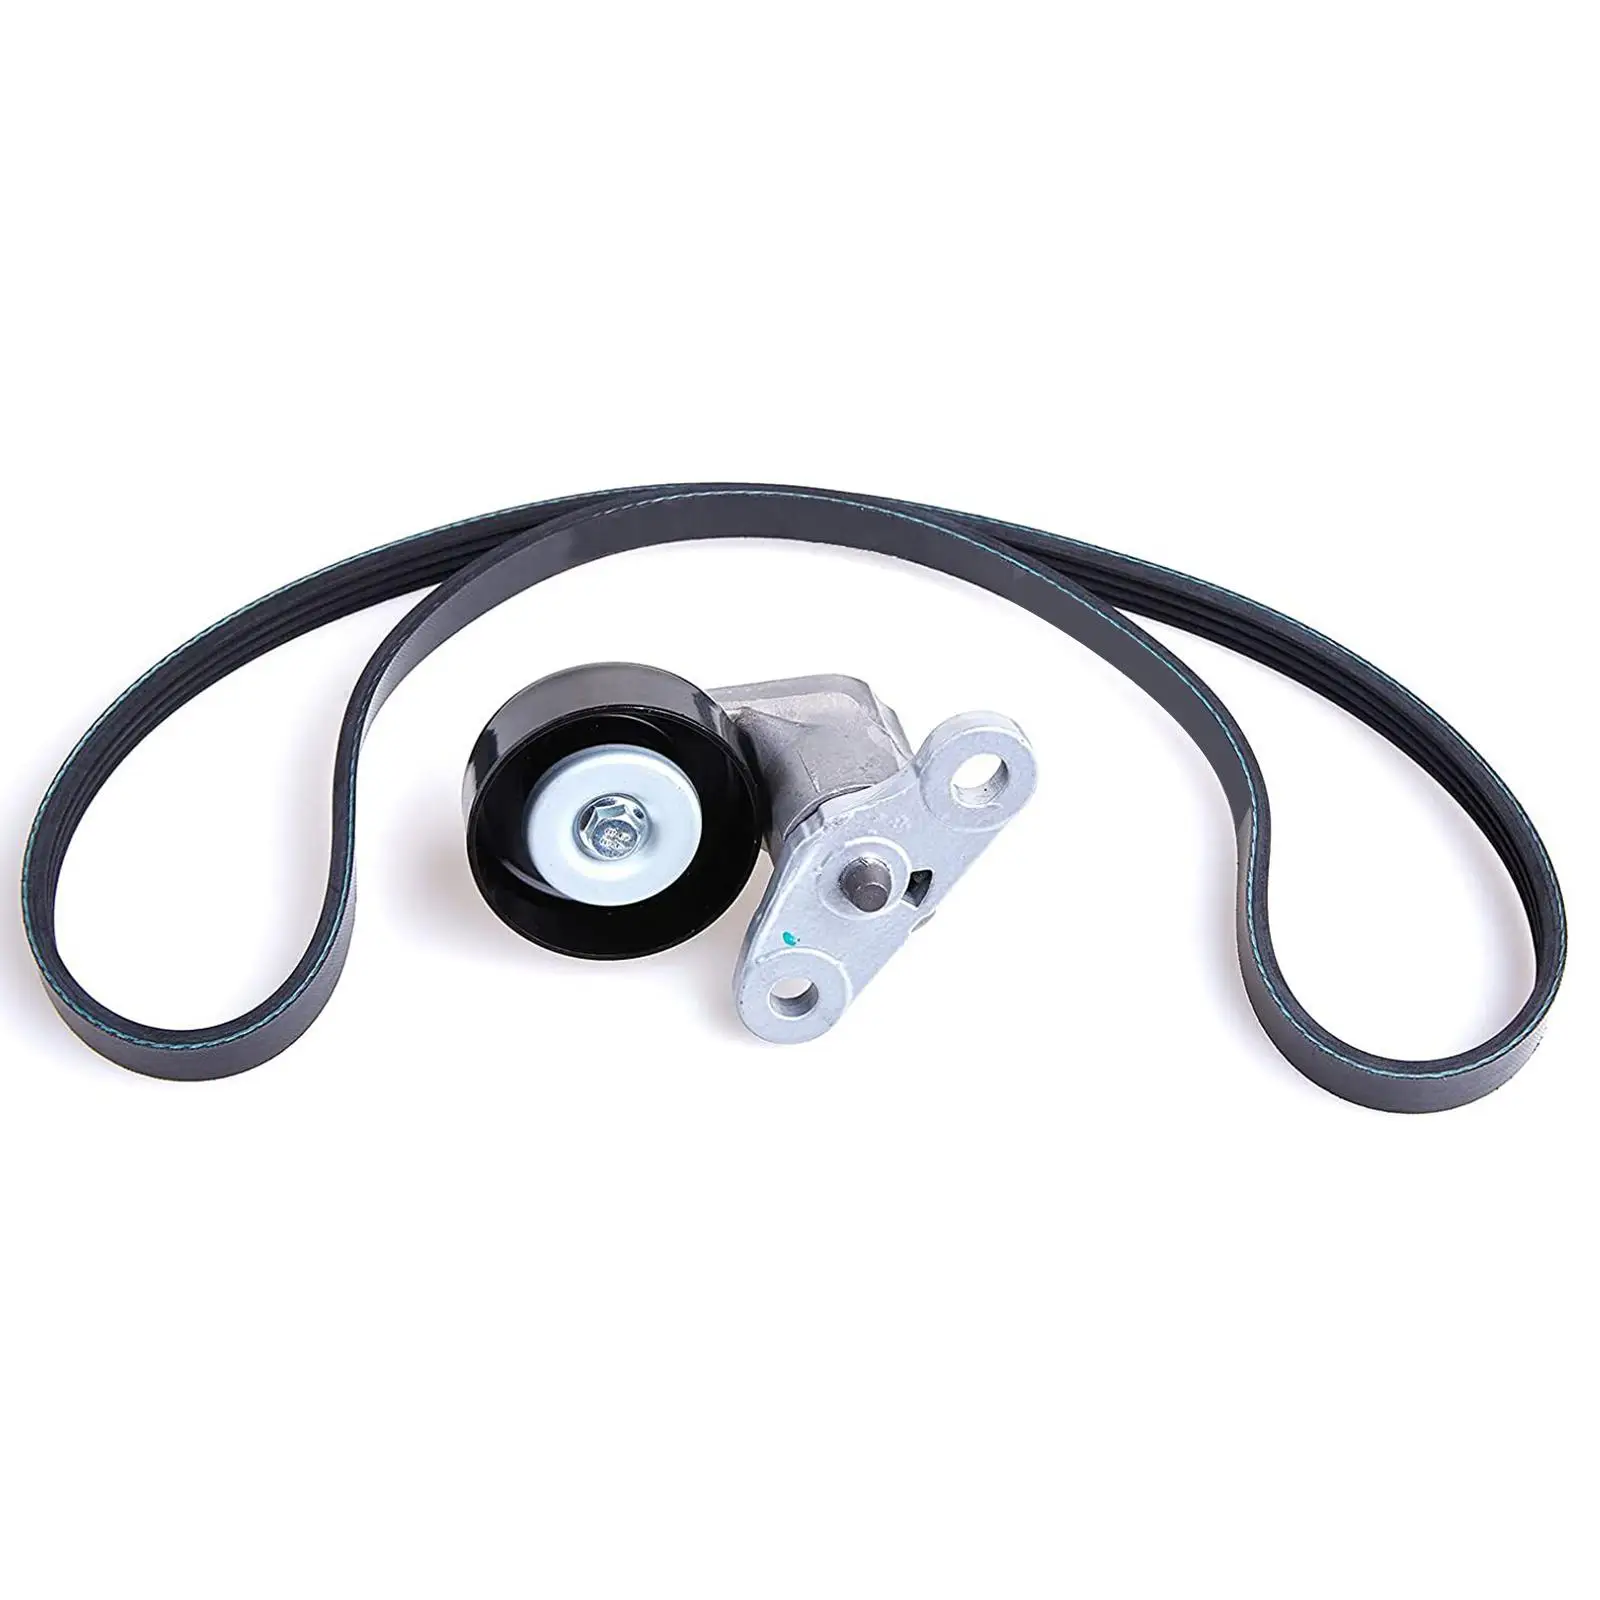 Serpentine Drive Belt Tensioner Kit Ack040378HD for Cadillac Escalade 2002-2008 Professional Easy Installation Accessories